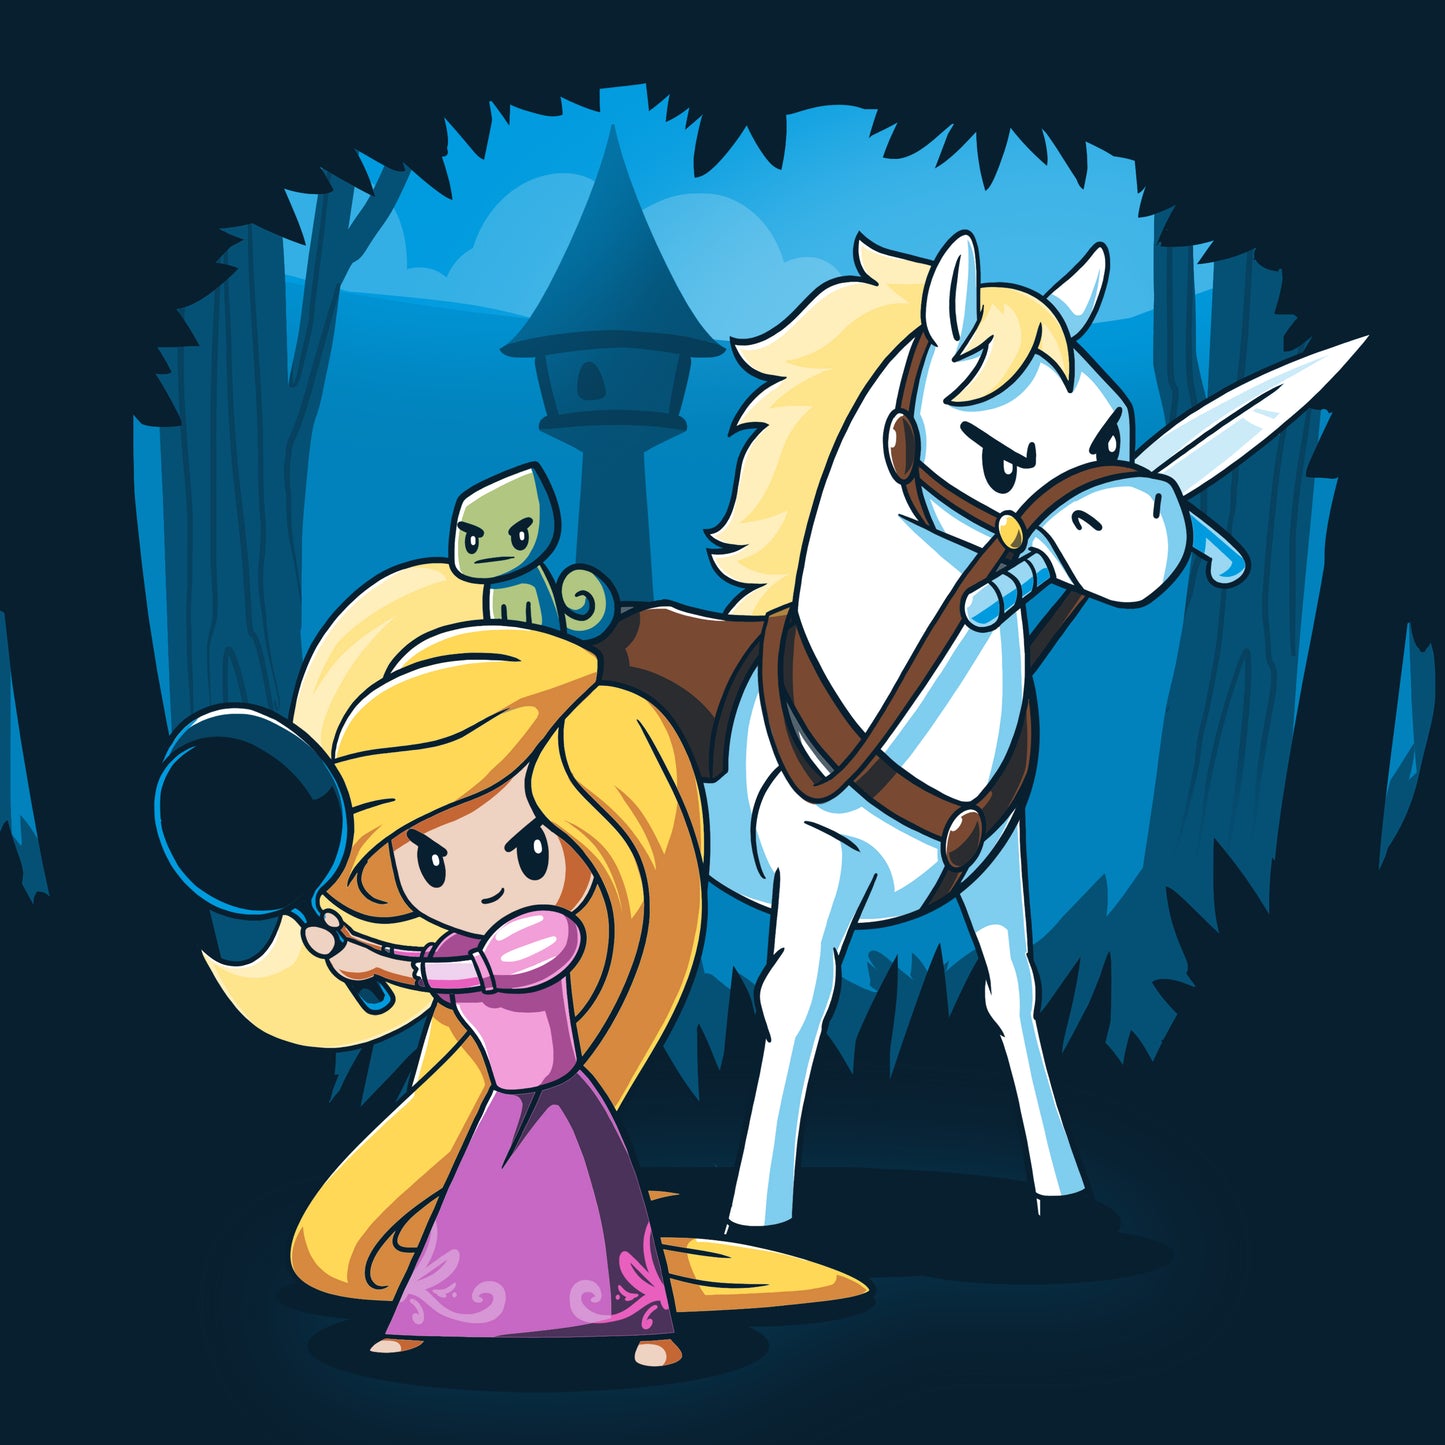 Officially licensed Rapunzel's Adventure Disney cartoon of a girl and a horse in a forest.